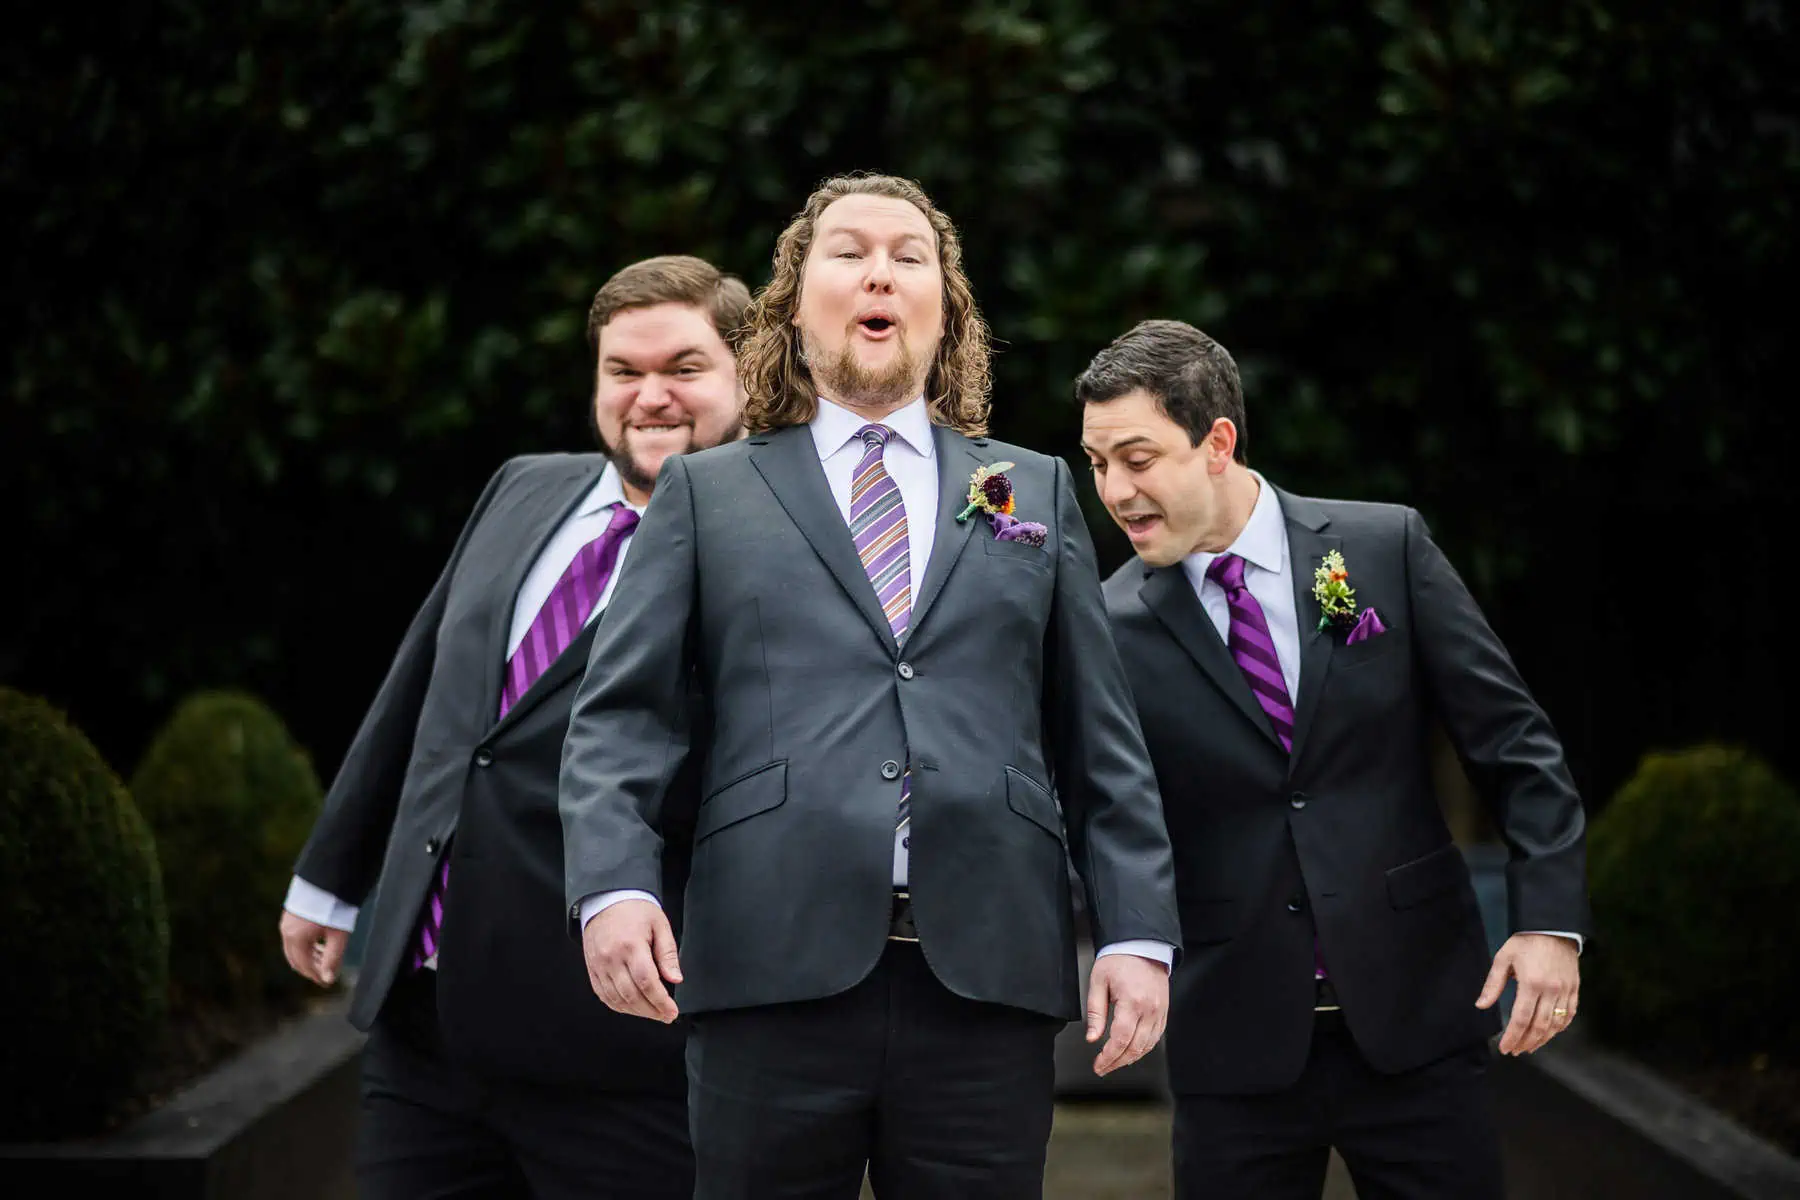 Three groomsmen in suits and ties are posing for a photo.